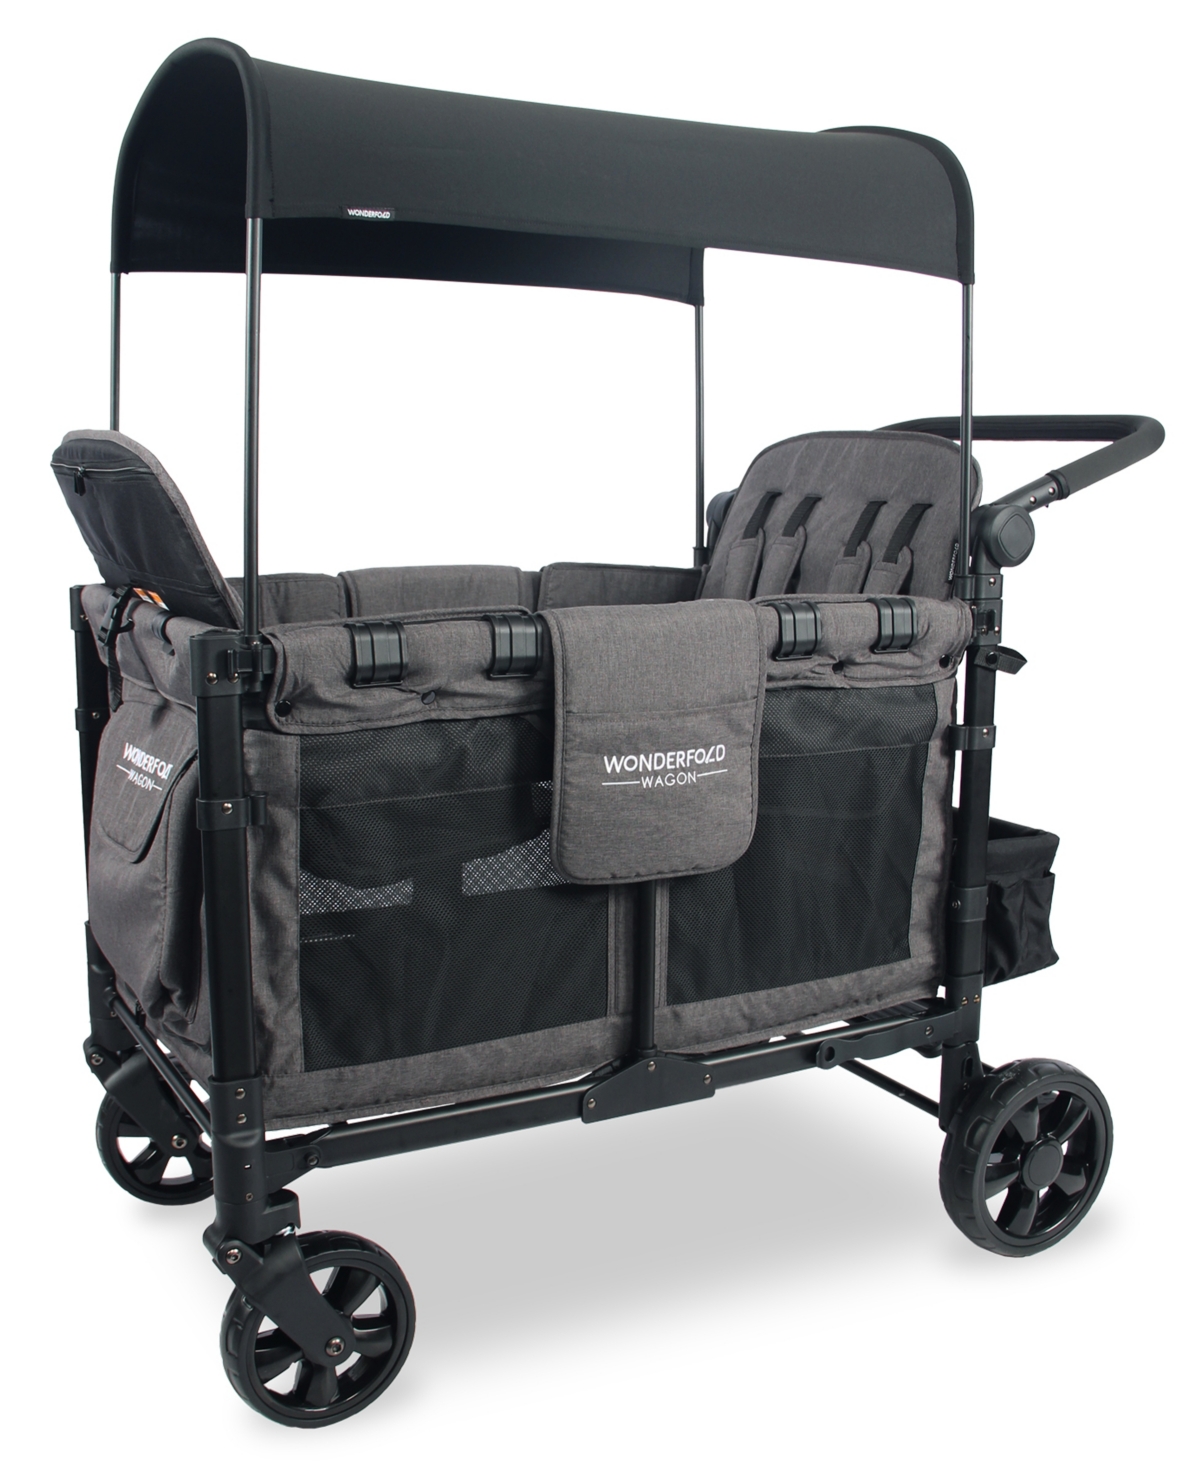 Shop Wonderfold Wagon W4 Elite Front Zippered Quad Stroller Wagon In Charcoal Gray